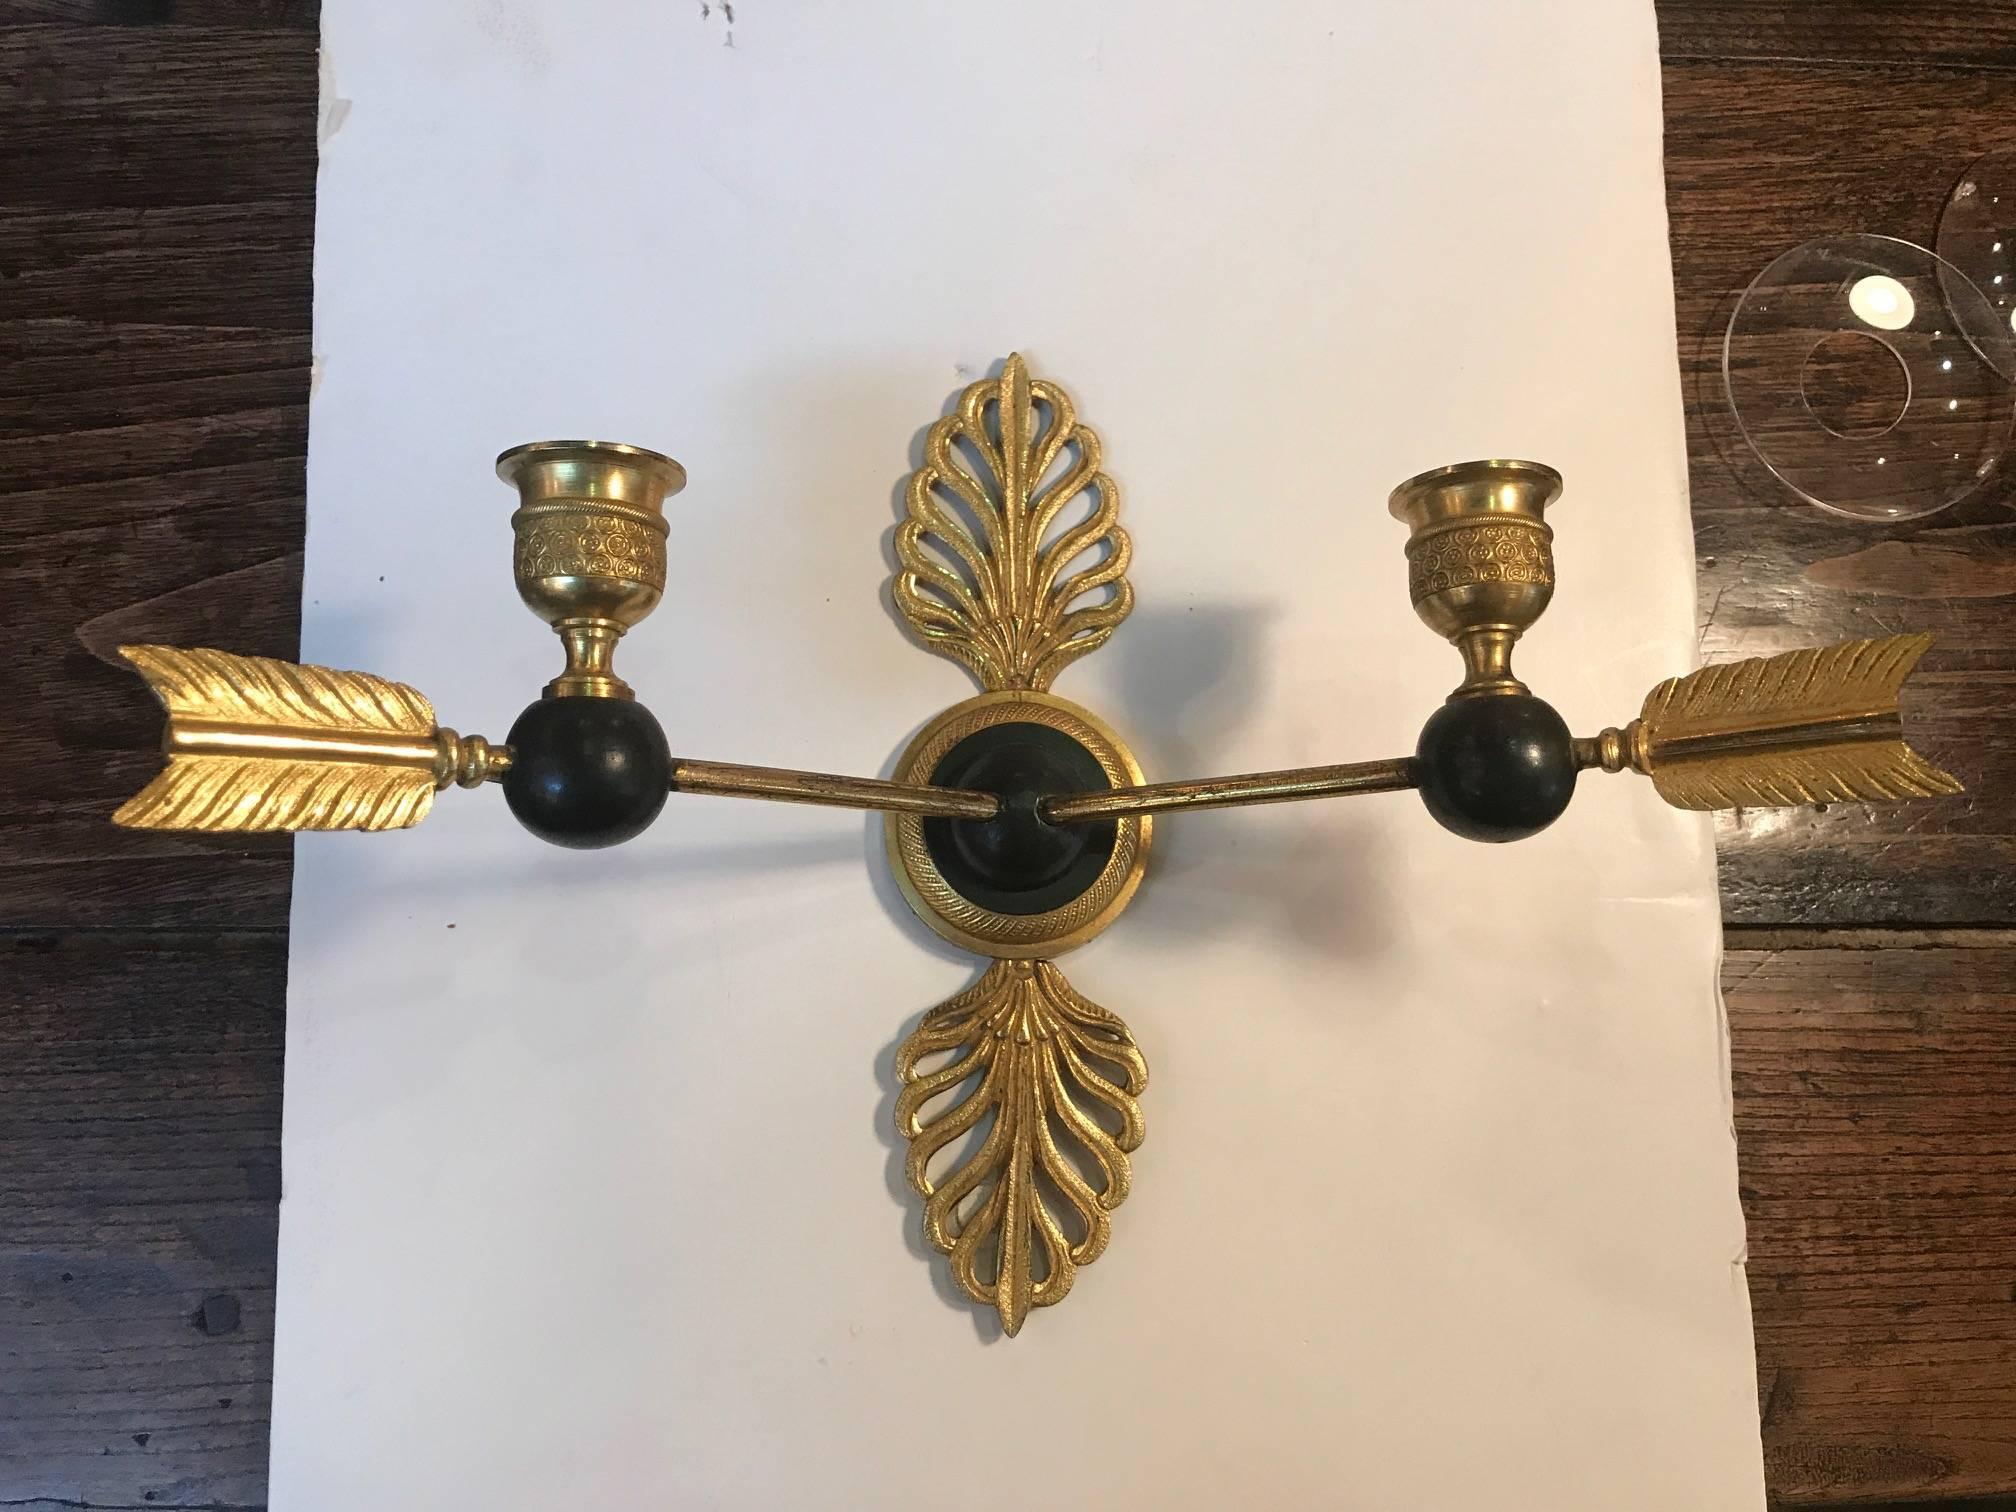 A pair of Empire neoclassical bronze candle sconces. Made in France in the 19th century, these sconces have not been electrified but an electrician can do that if you choose.